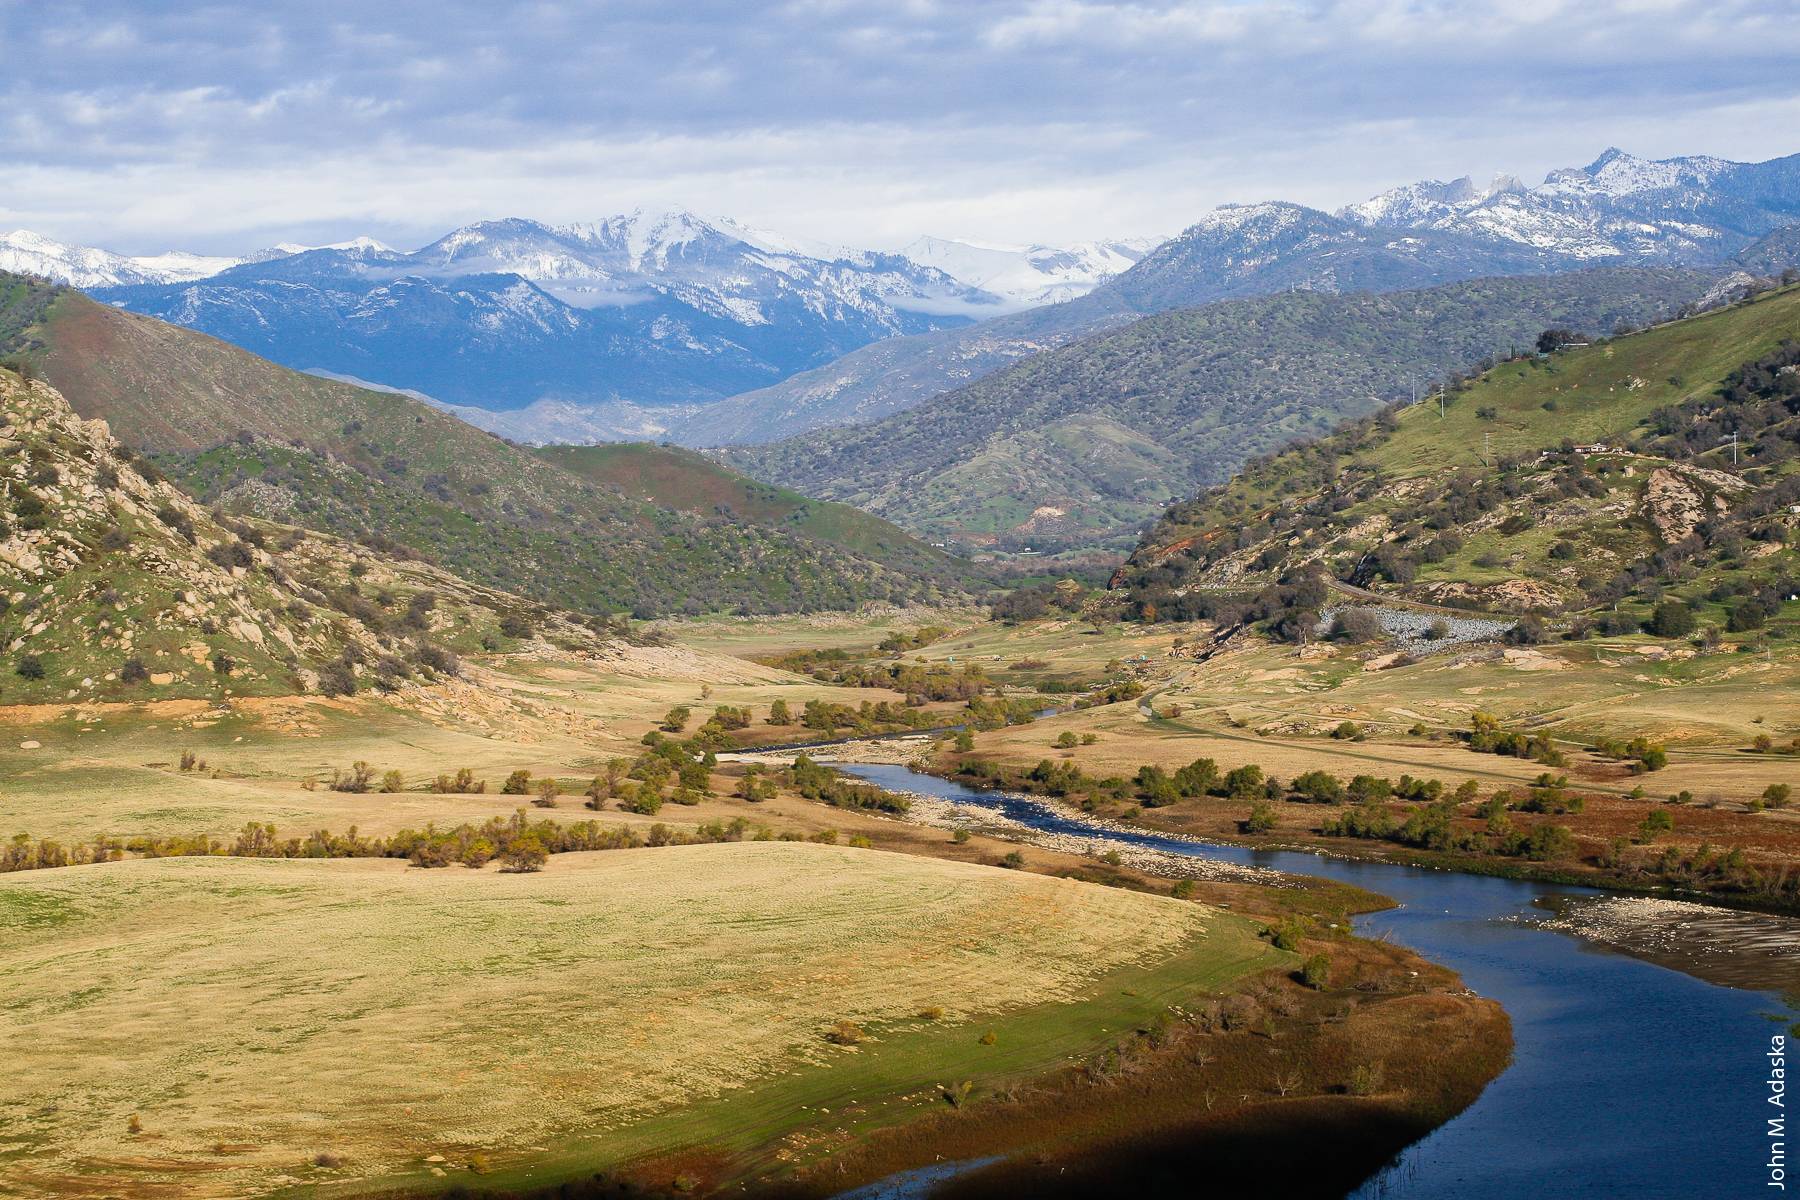 Lake Kaweah in the Sierra foothills of California, one of the watersheds in which researchers studied comanagement of livestock grazing and water quality.